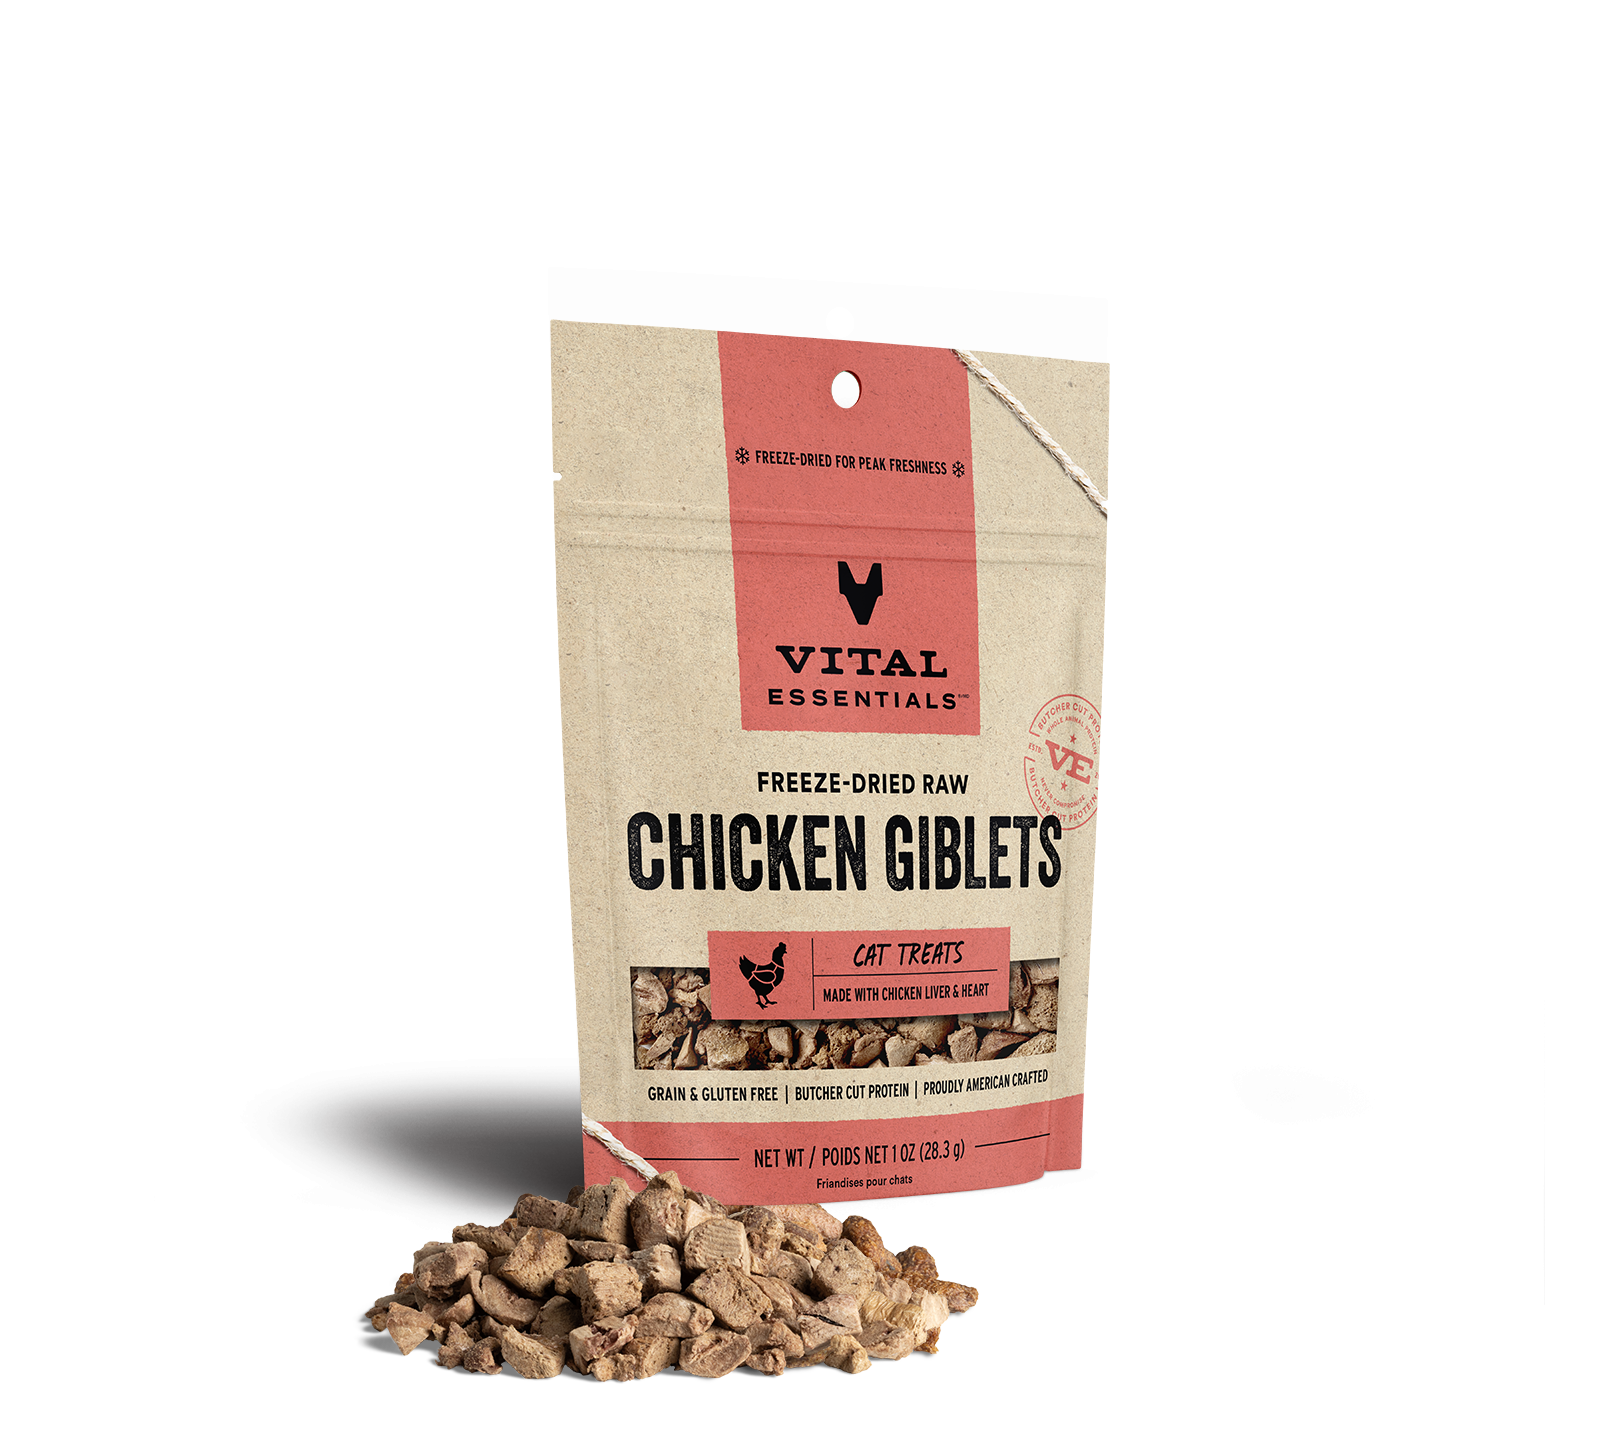 Vital Essentials Freeze-Dried Chicken Giblets Cat Treats, 1 oz - Health/First Aid